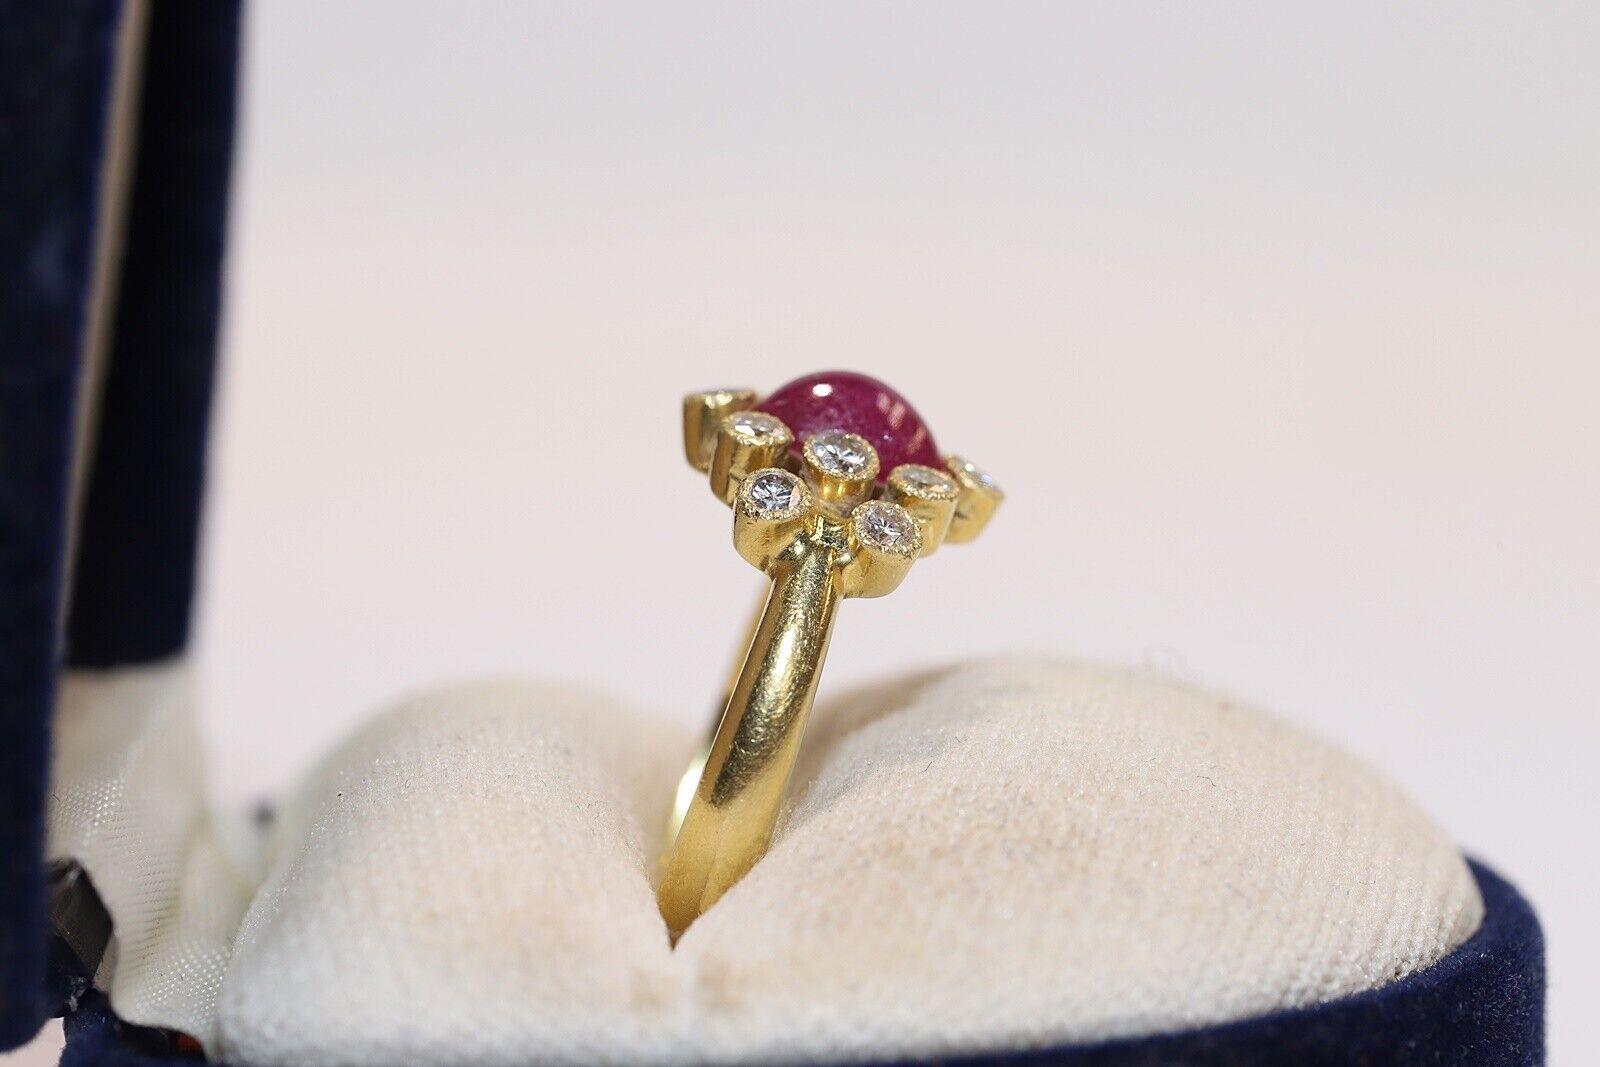 In very good condition.
Total weight is  4.5 grams.
Totally is diamond 0.43 carat.
The diamond is has  G-H color and vvs-vs.
Totally is ruby 1.20 carat.
Ring size is US 6.2 (We offer free resizing)
Box is not included.
We can make any size.
Please